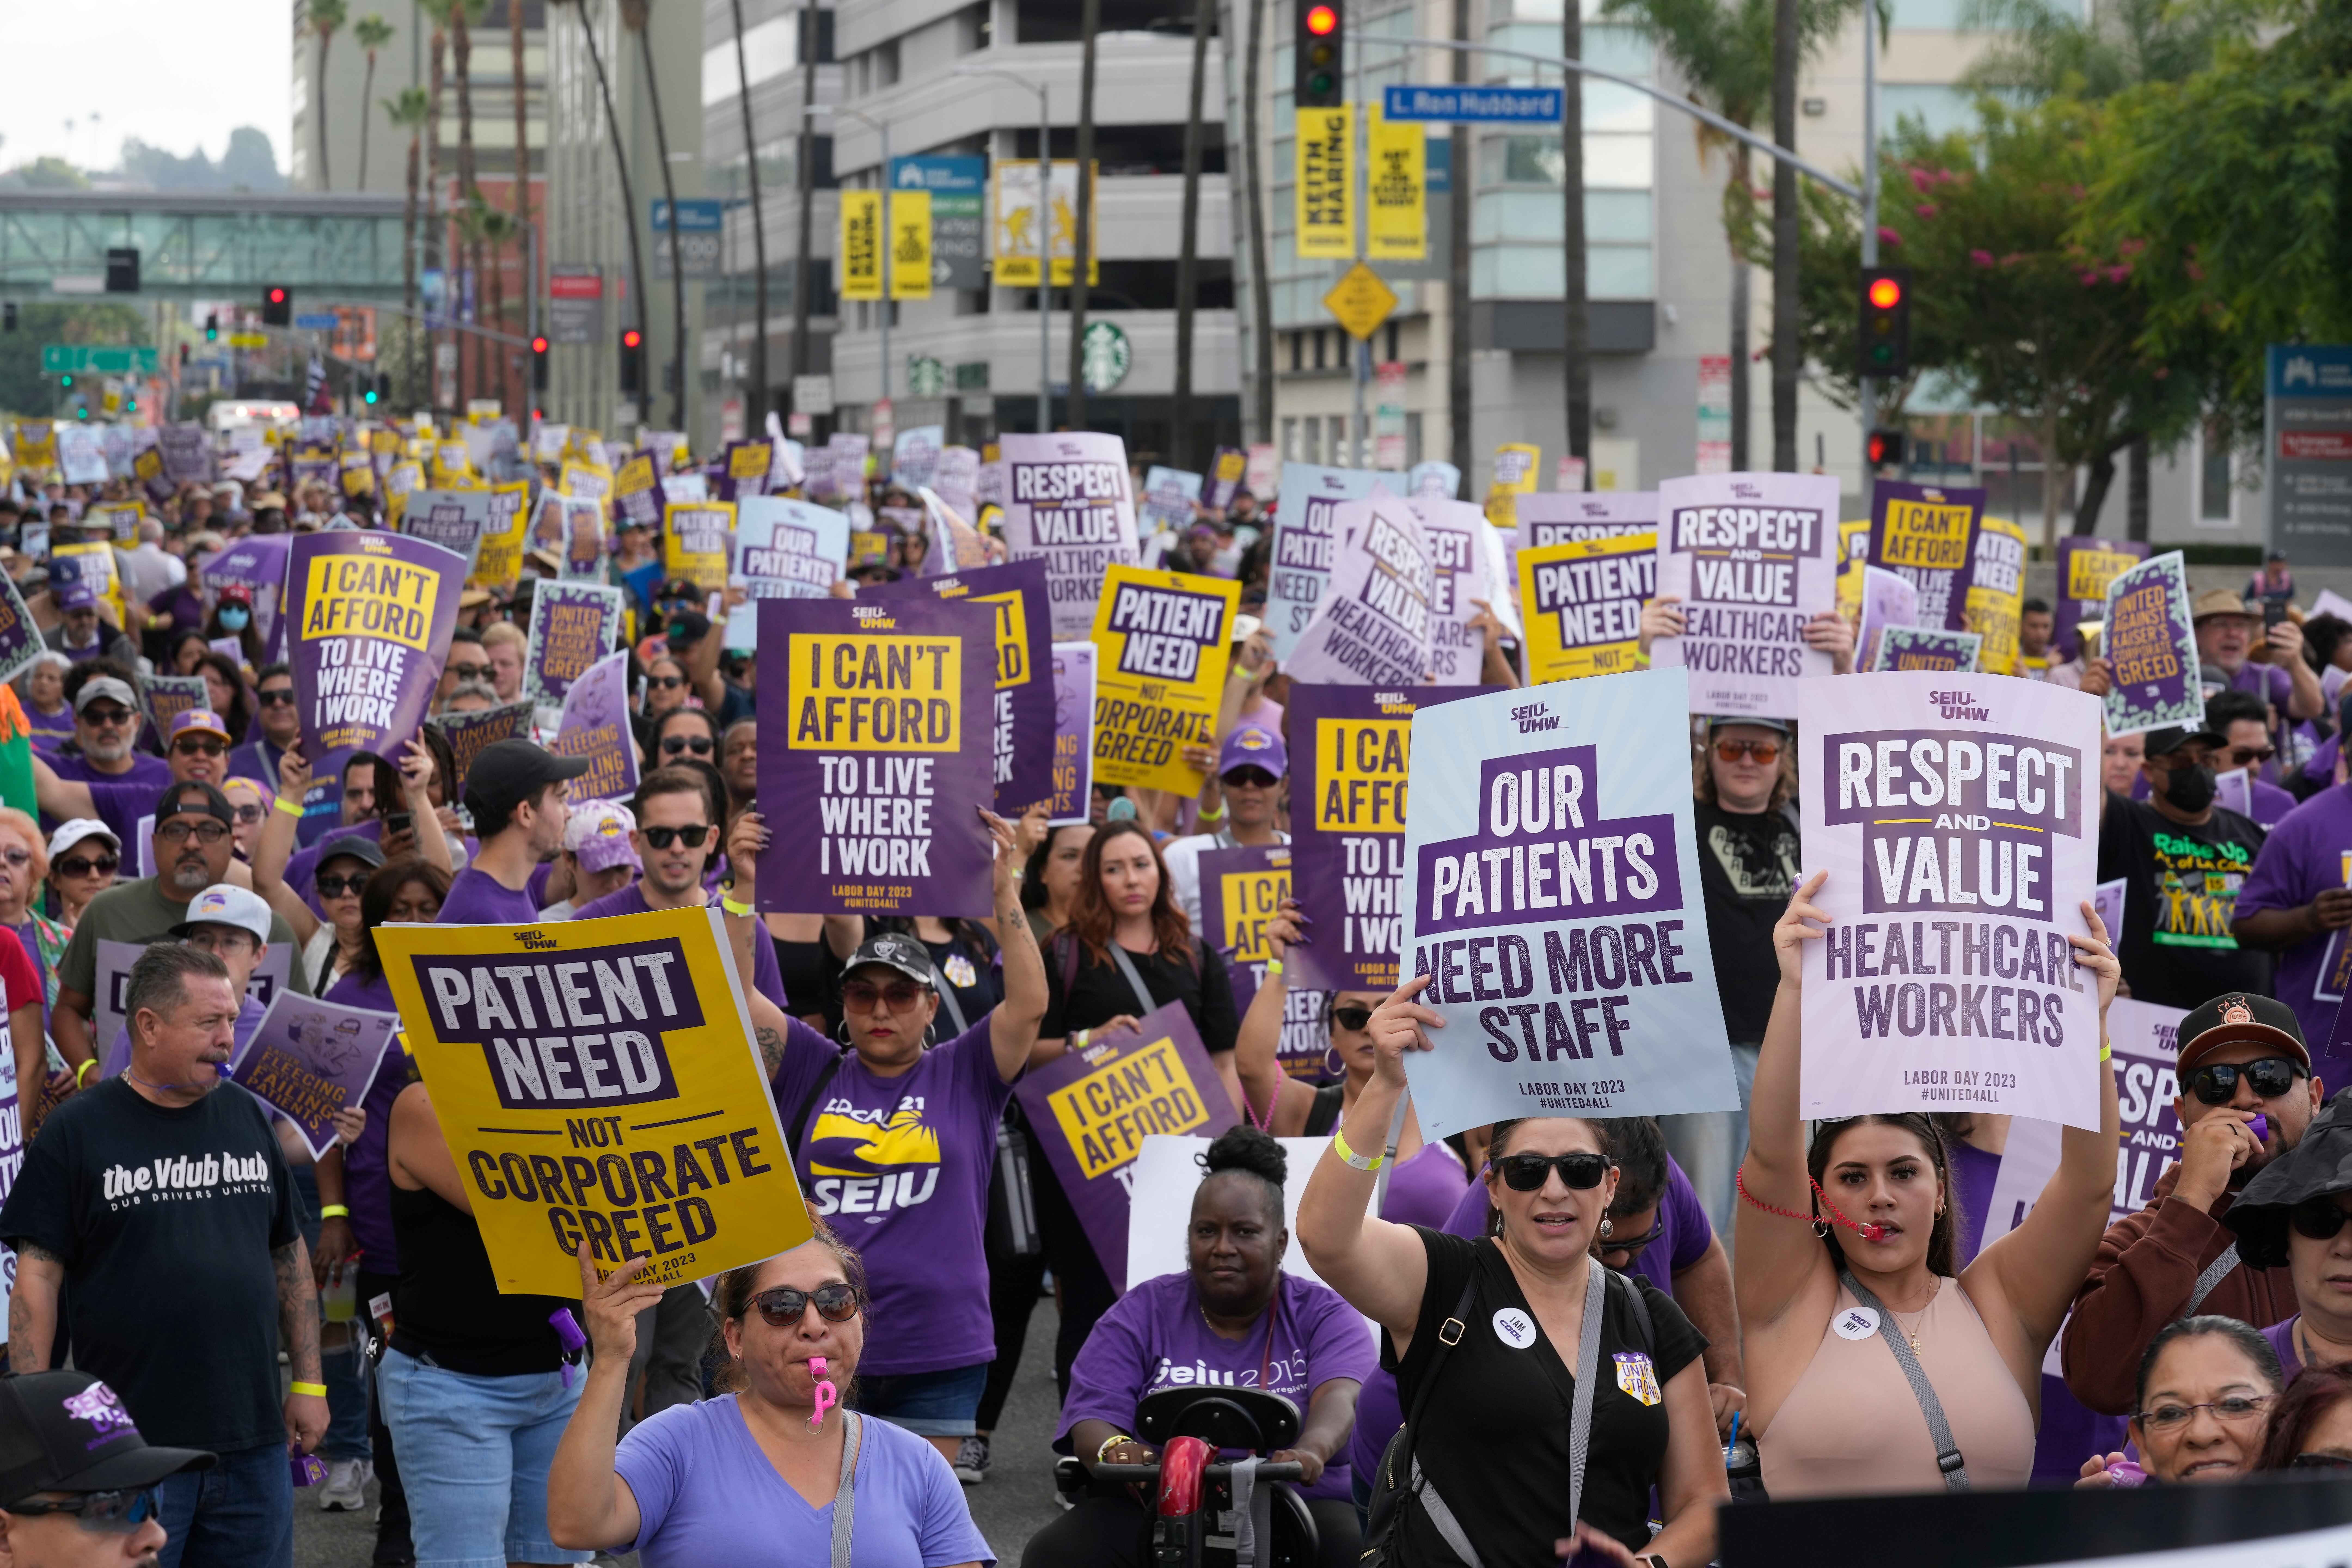 California's healthcare and food industry workers could receive more pay after the state legislature approved a measure to raise their minimum wage to $25 per hour. AP Photo/Damian Dovarganes